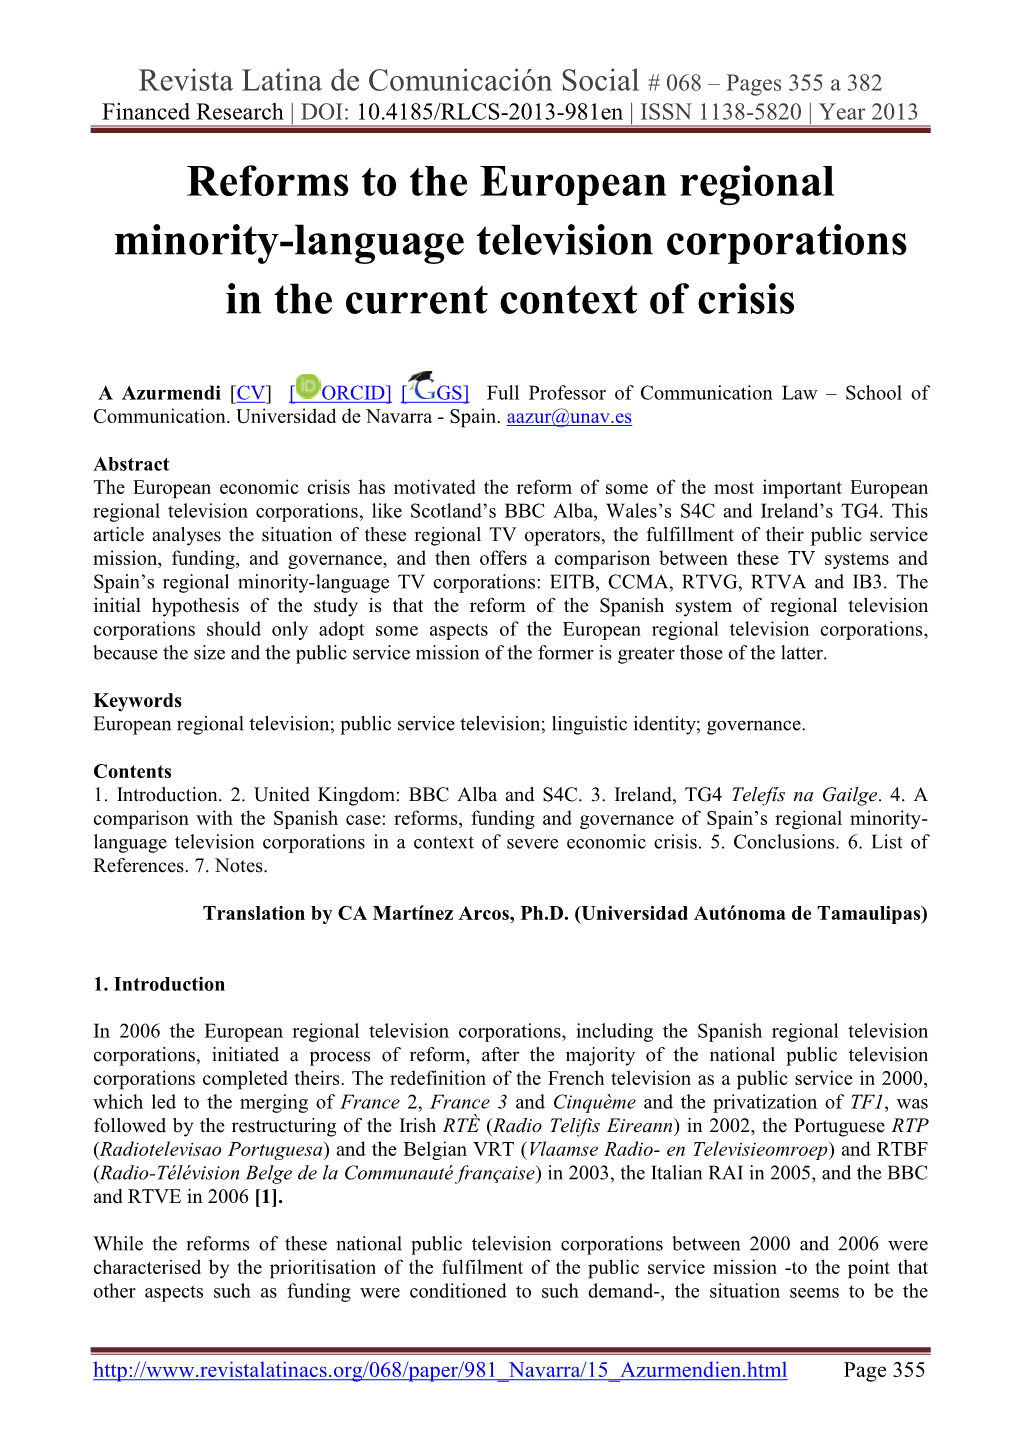 Reforms to the European Regional Minority-Language Television Corporations in the Current Context of Crisis